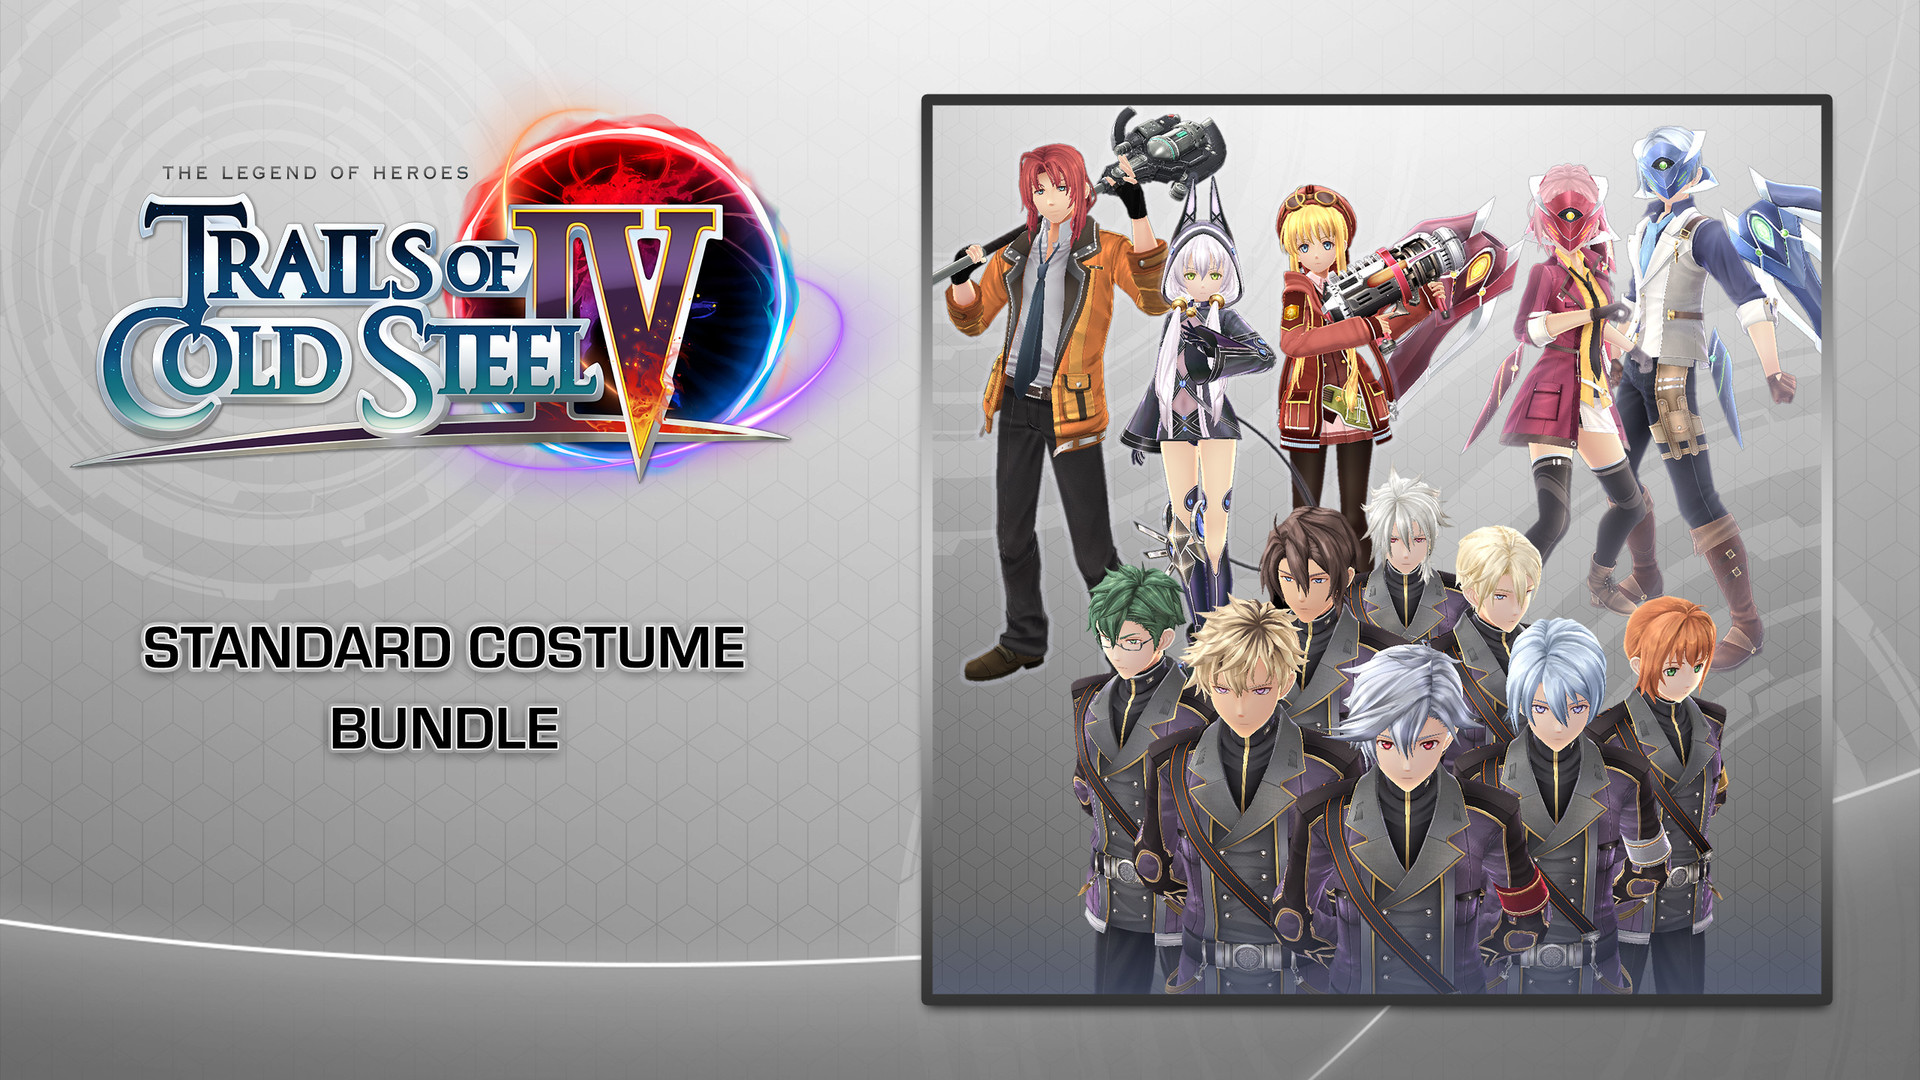 The Legend of Heroes: Trails of Cold Steel IV - Standard Costume Bundle Featured Screenshot #1